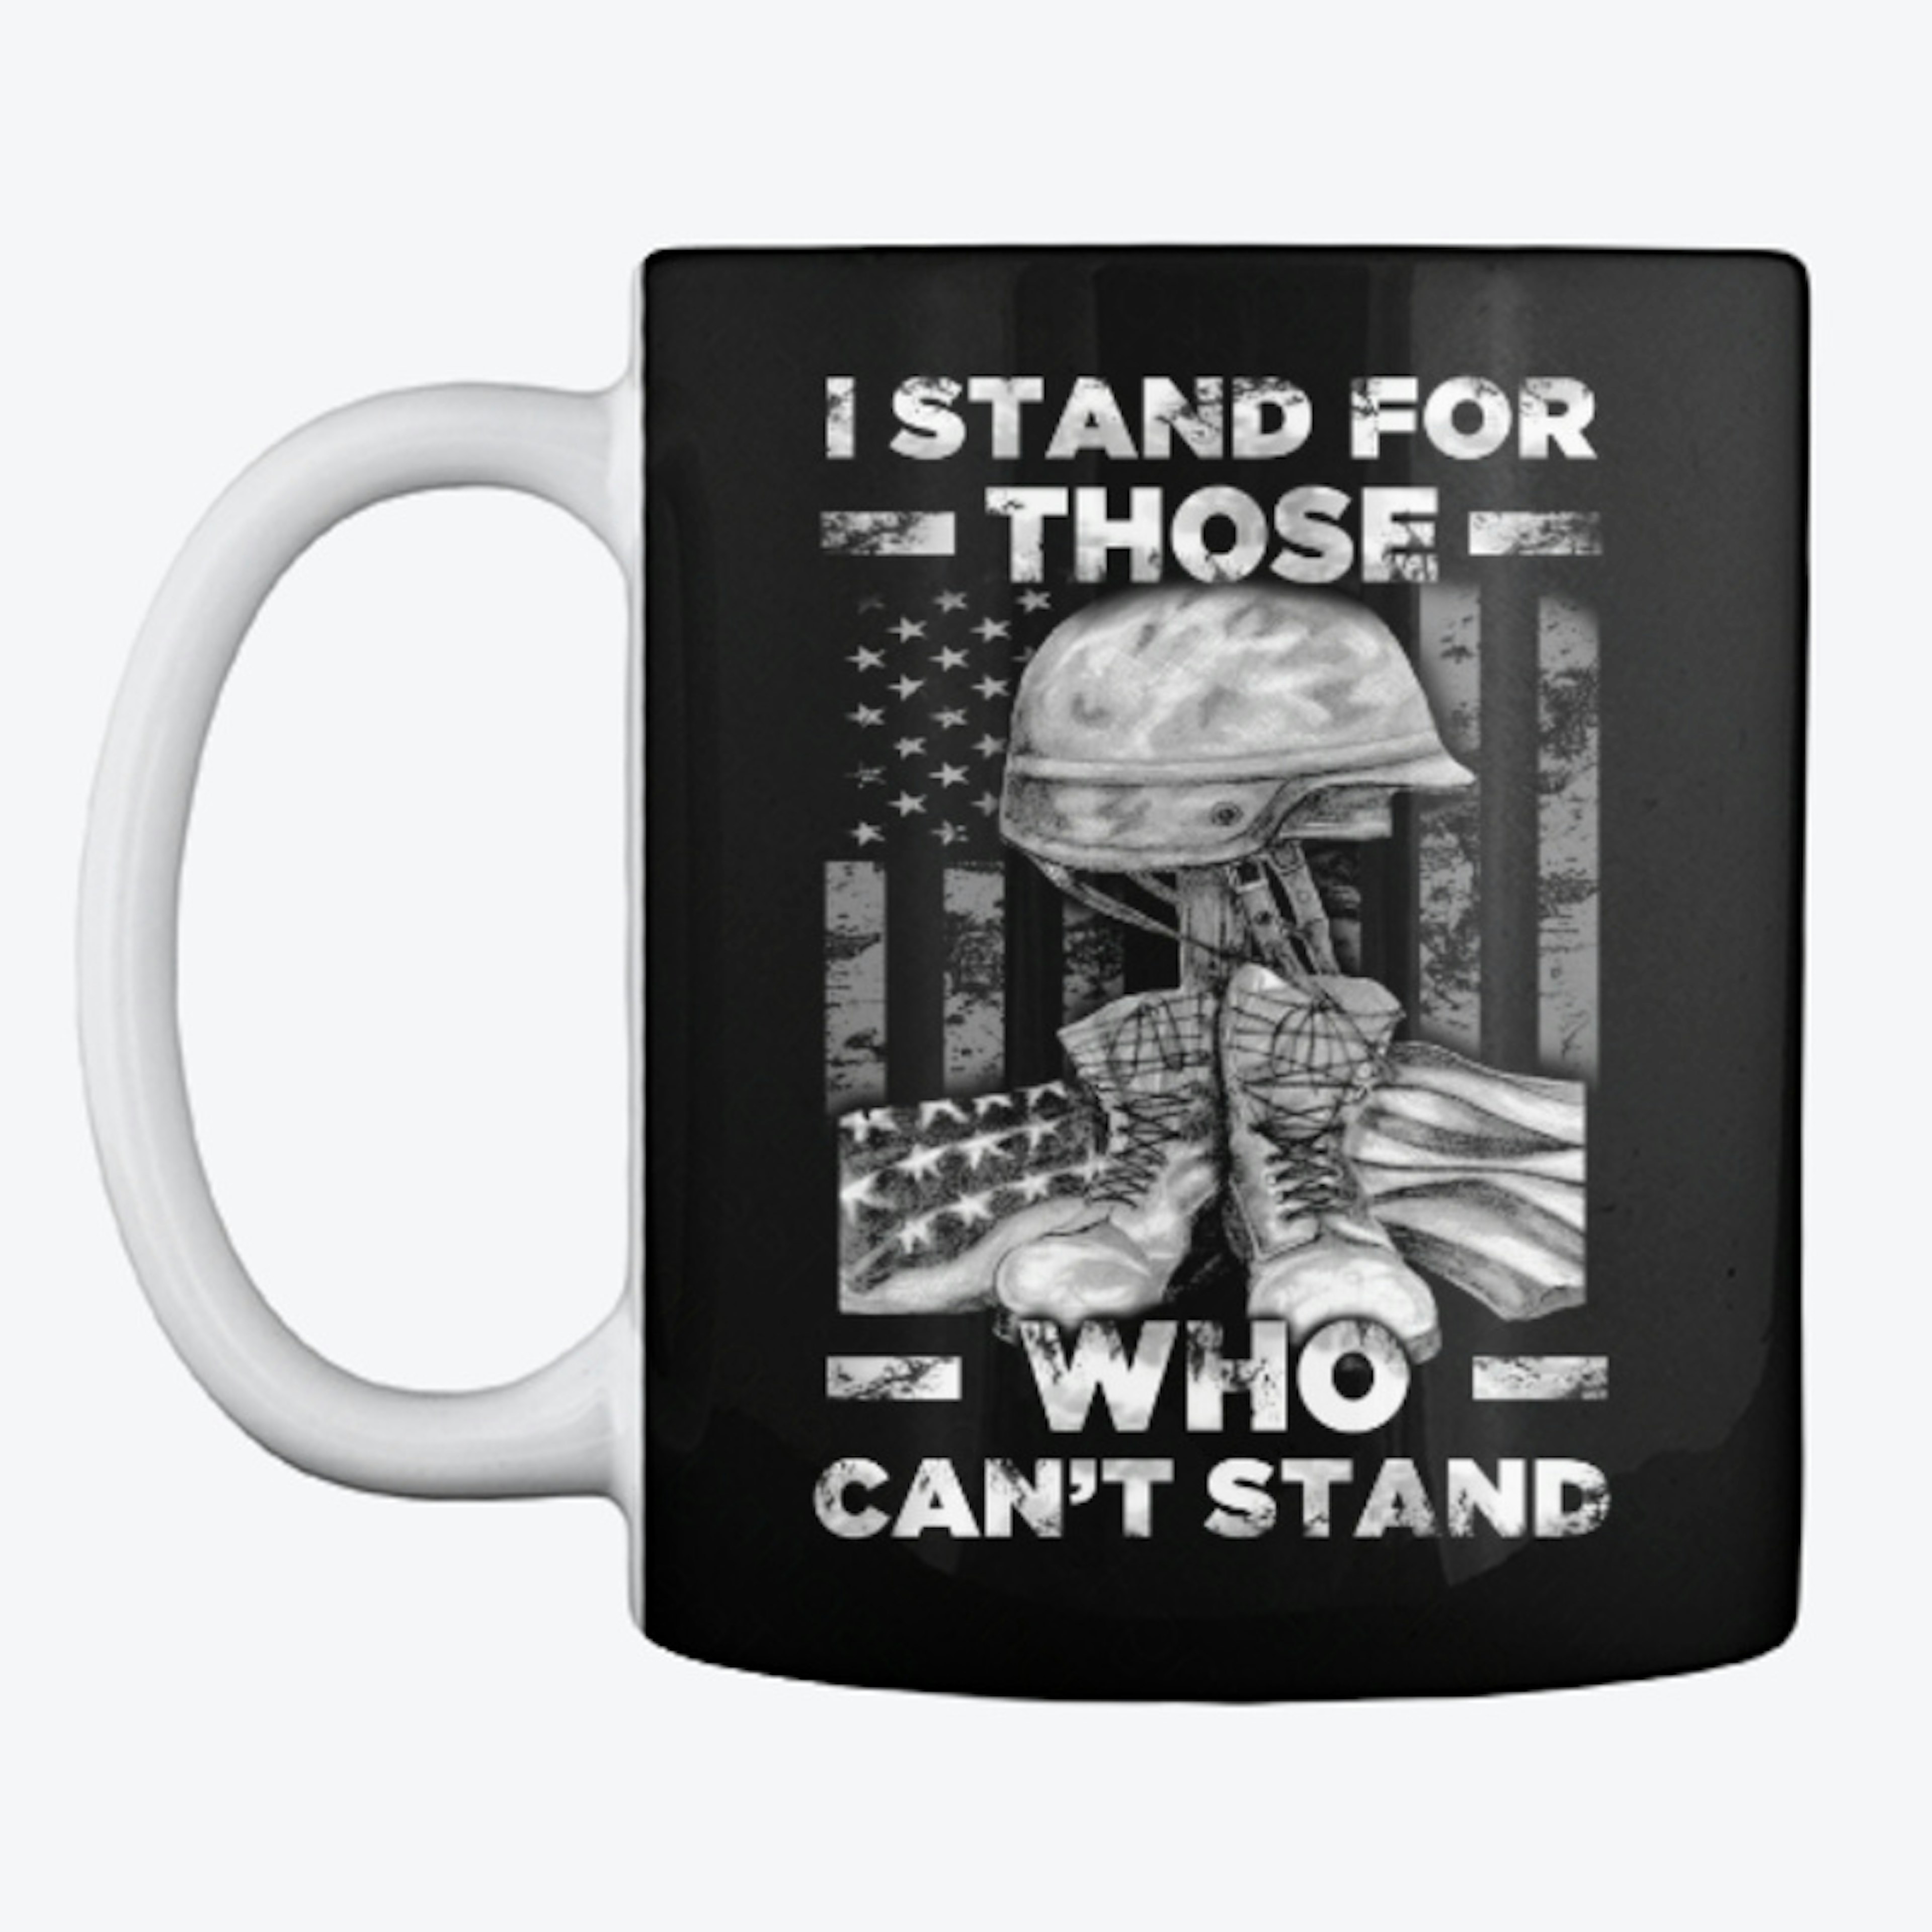 I Stand For Those Who Can't Stand